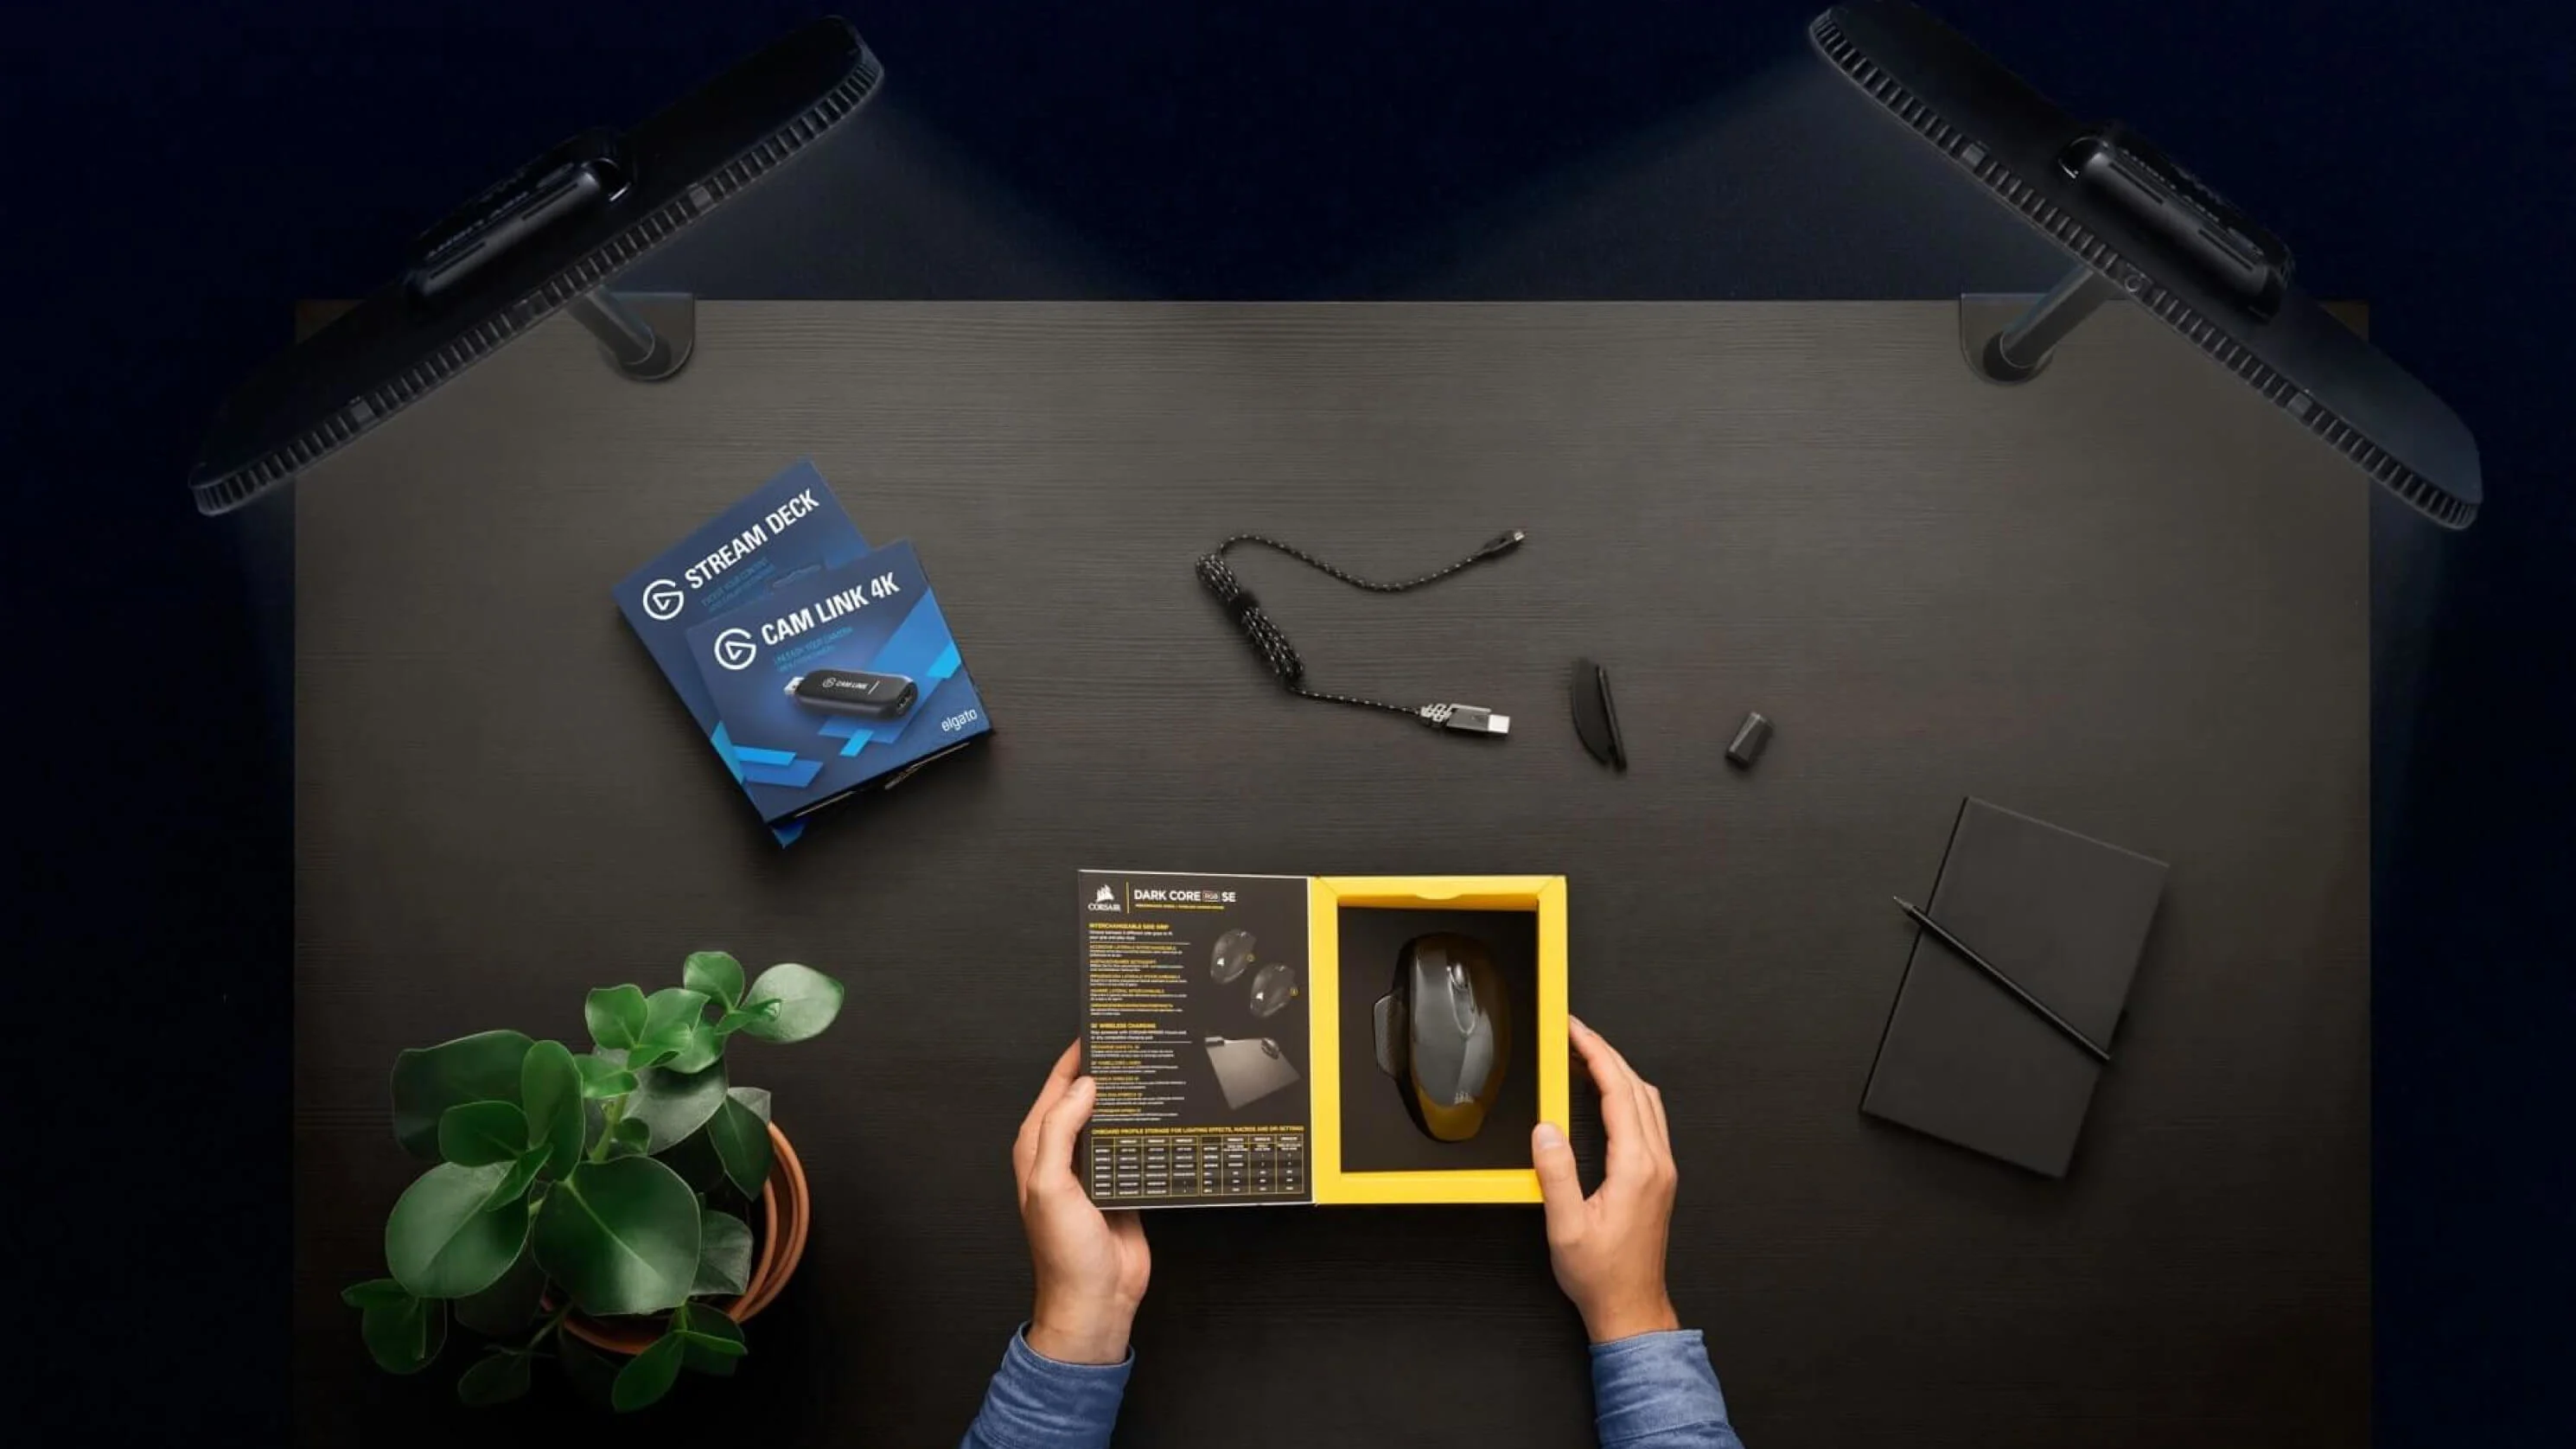 Content creator unboxing a Corsair mouse using two Key Lights in the setup